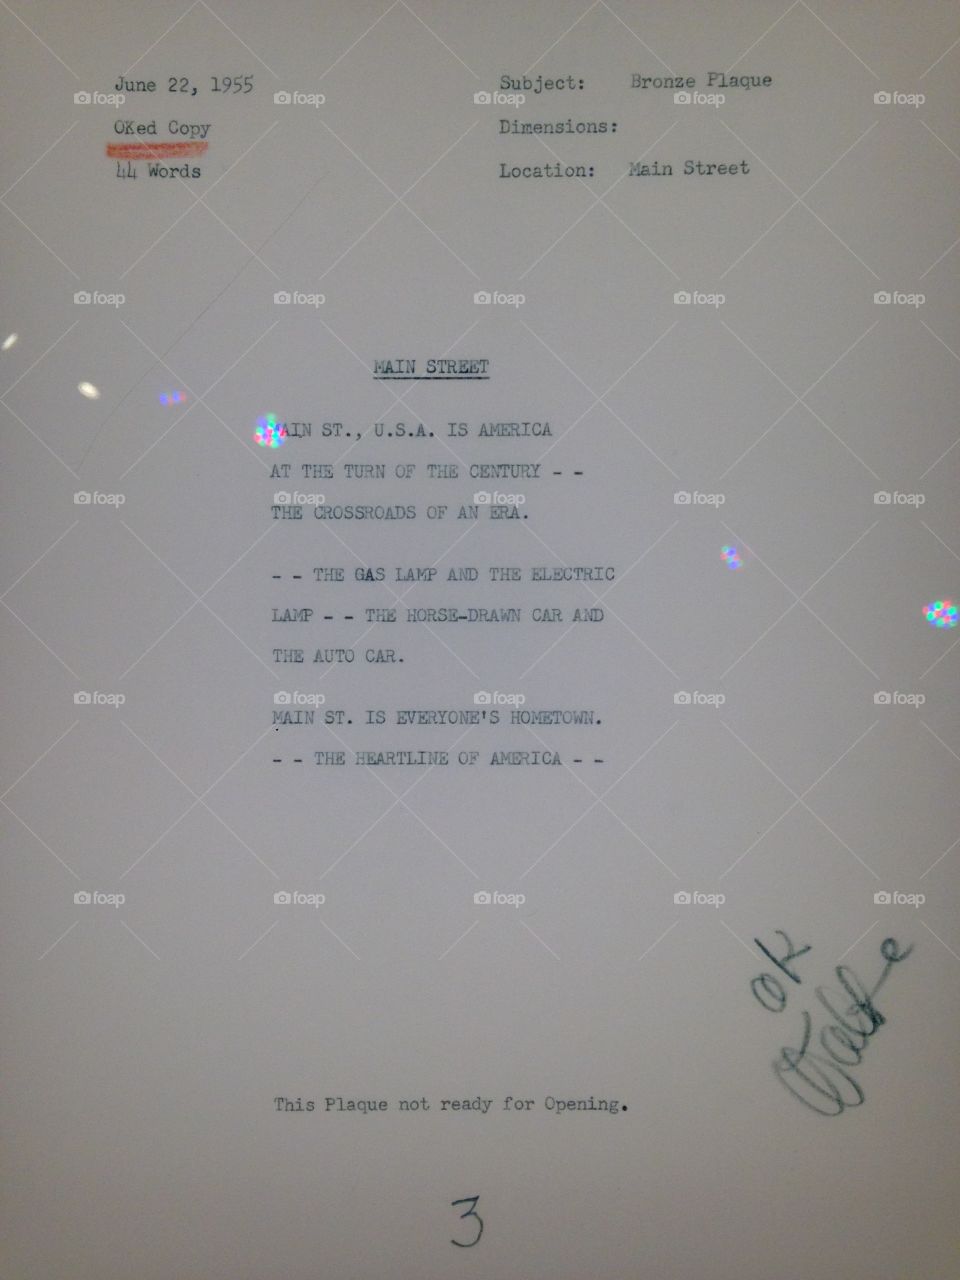 The final draft of a document at Disneyland. This artifact is located at the Walt Disney Family Museum in San Francisco, CA.